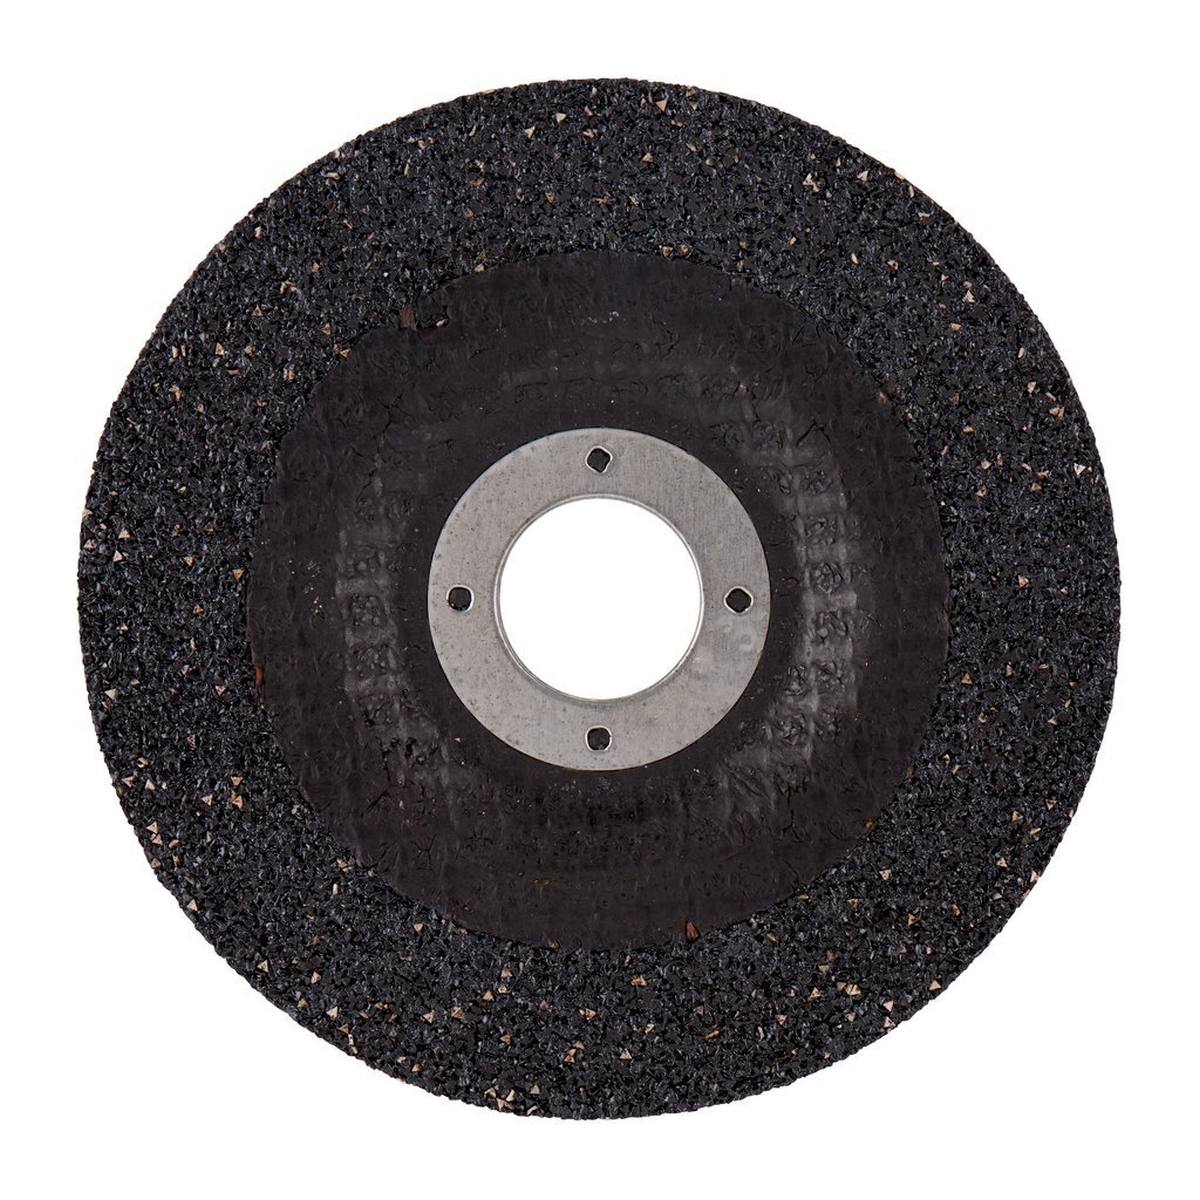 3M Silver grinding disc, 115 mm, 7.0 mm, 22.23 mm, type 27